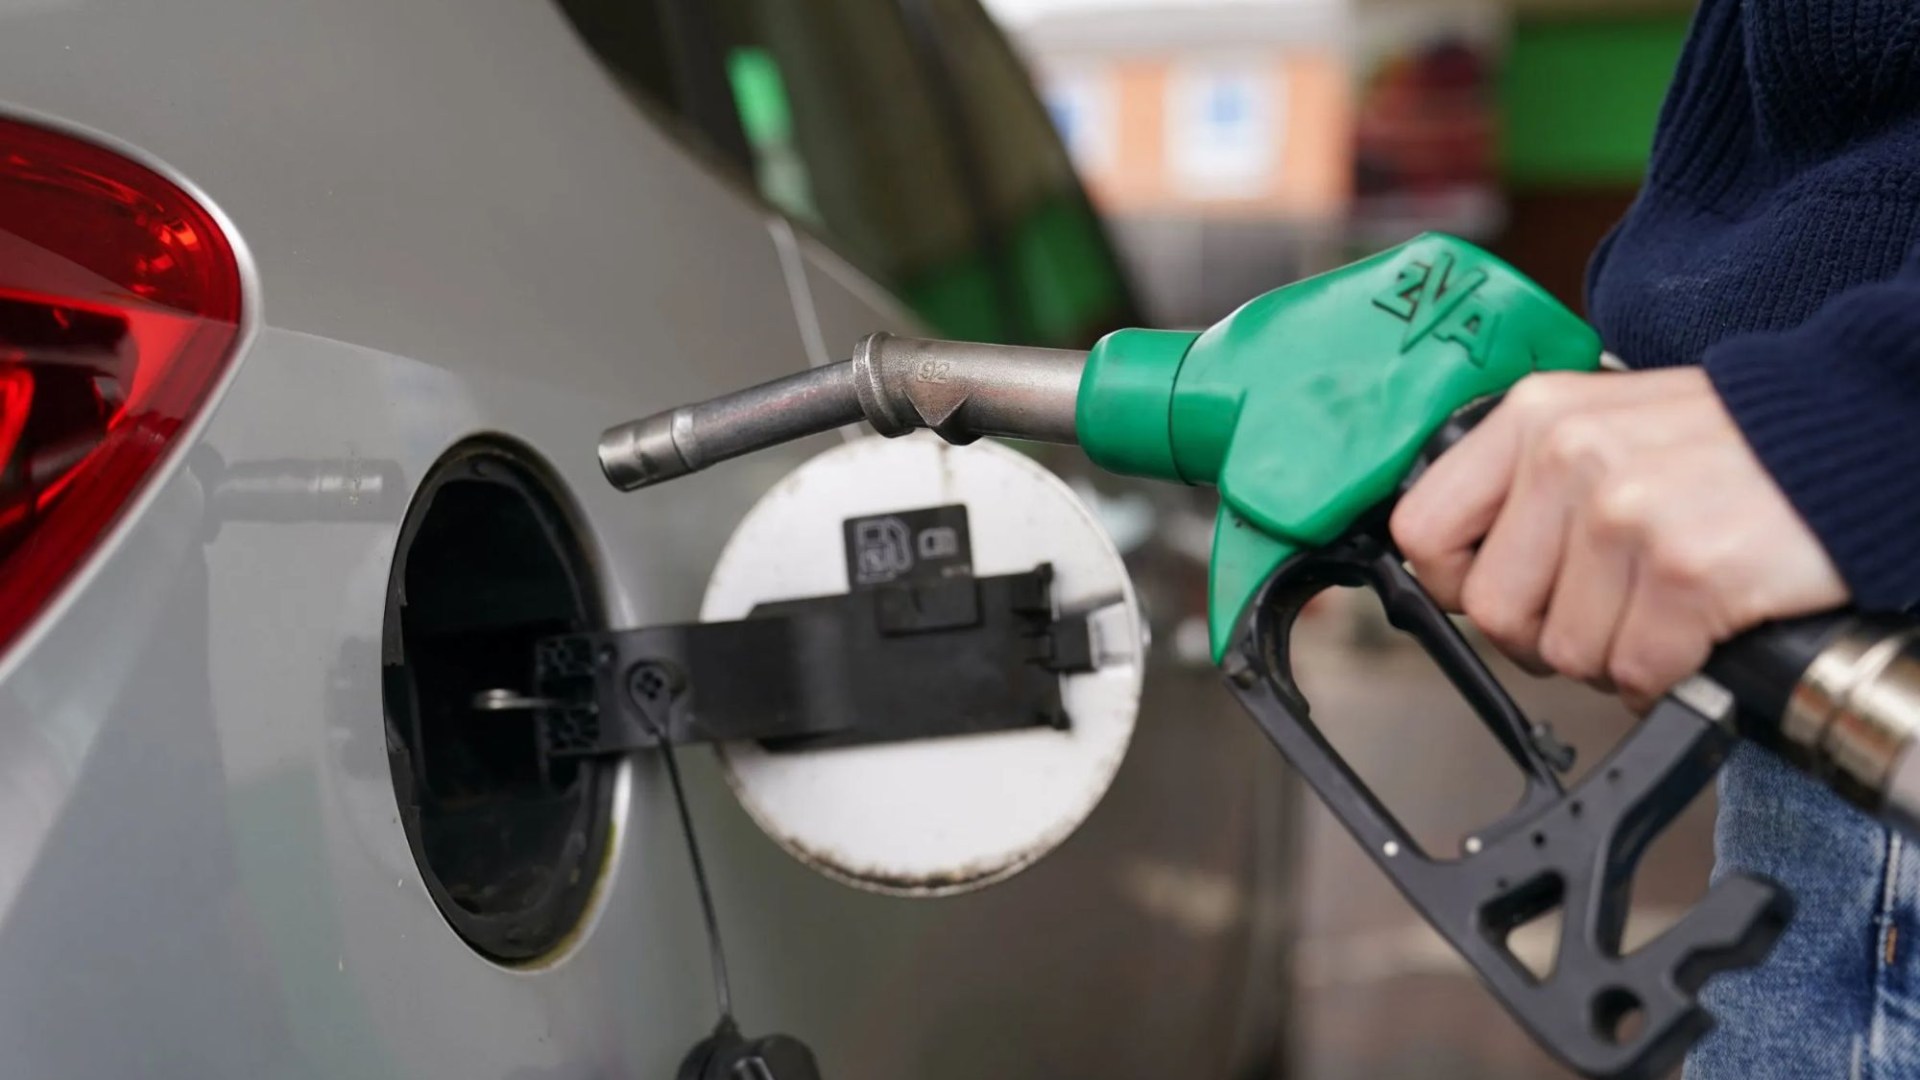 Major fears planned fuel cost increases will see 2 pump charge & hit food prices as ‘only matter of time’ alert issued [Video]